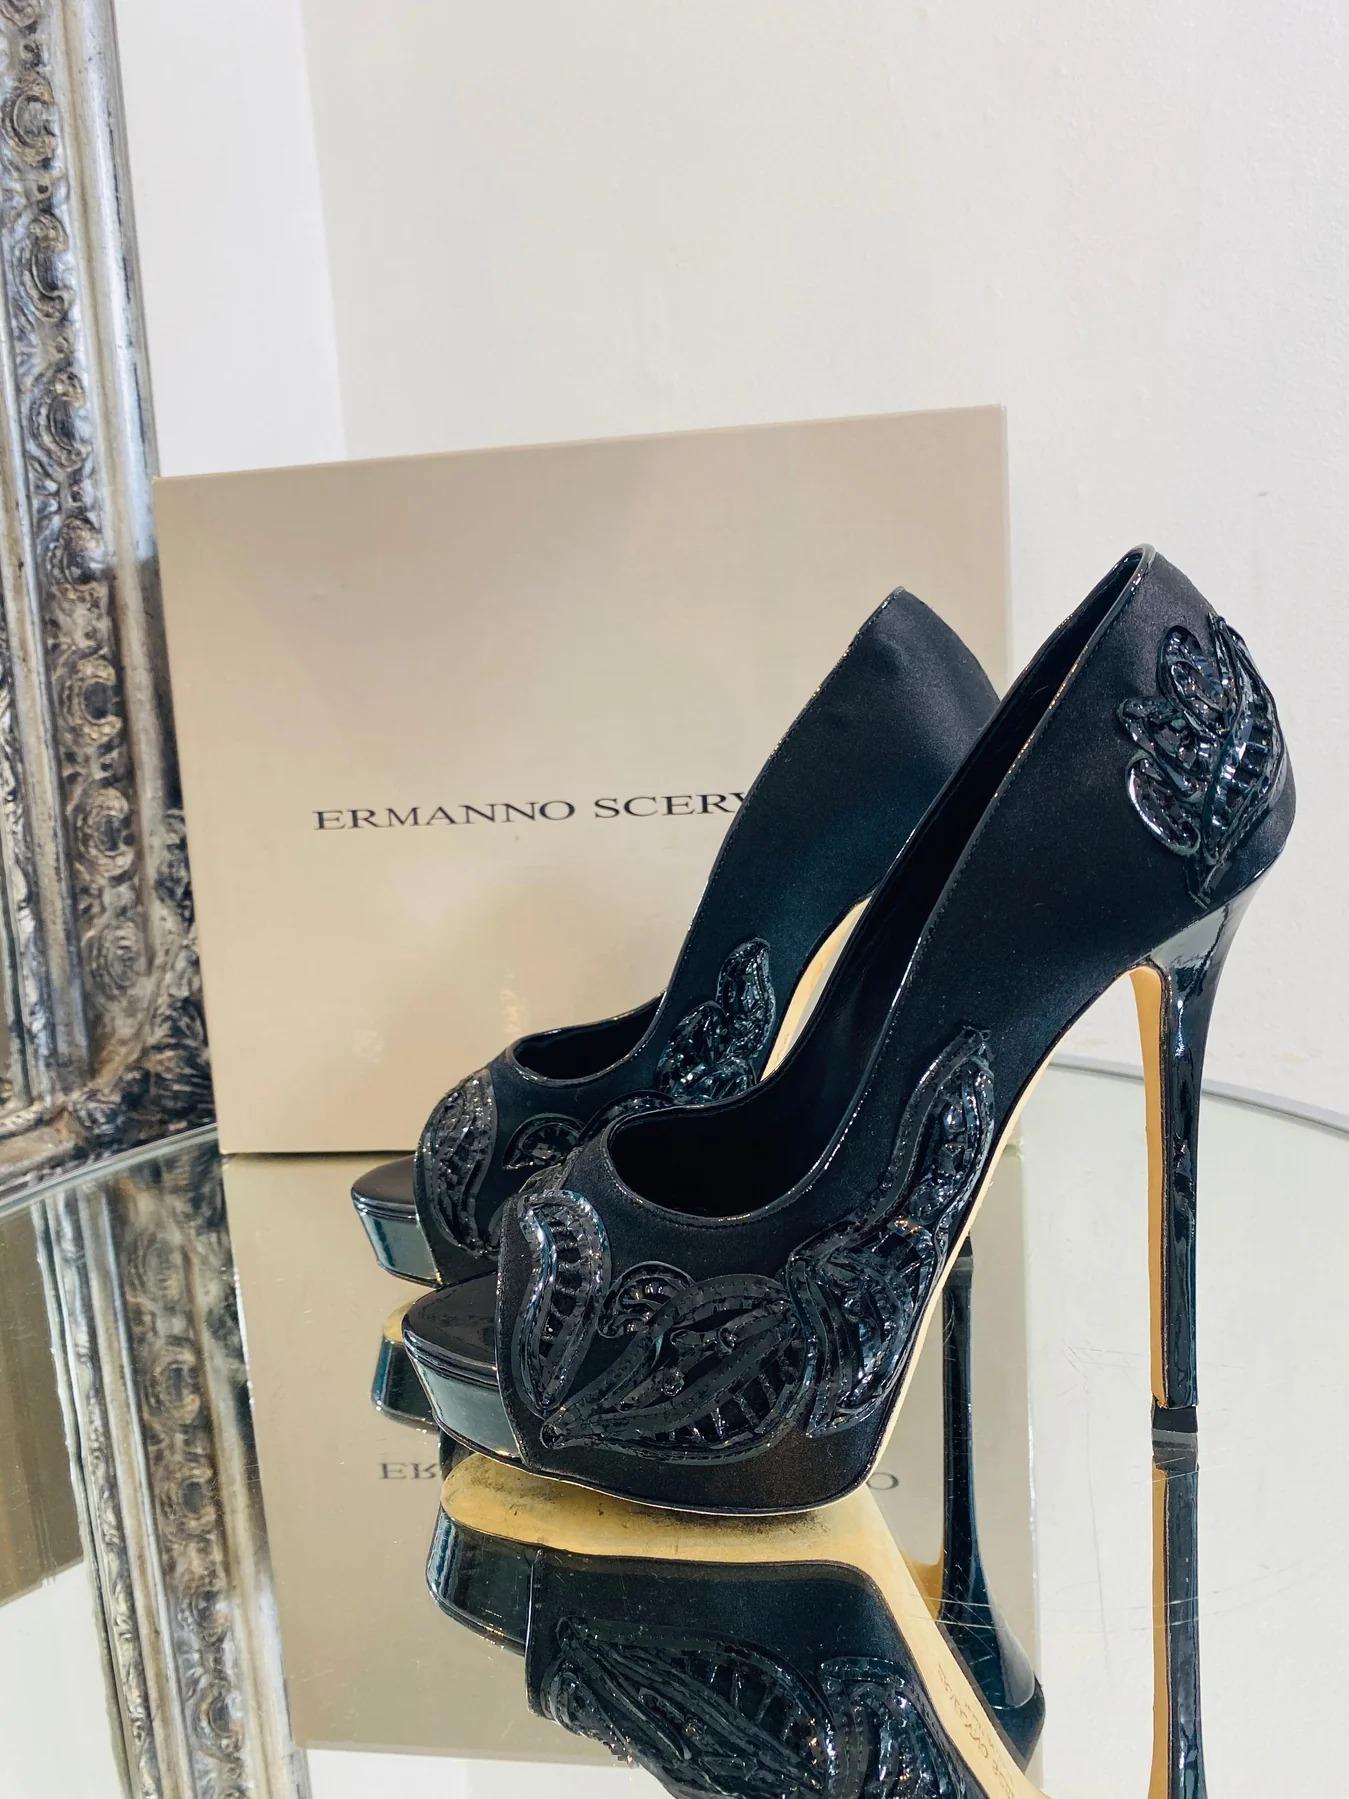 Ermanno Scervino Peep Toe Heels with Satin Finish

Embroidery details to the side and back. Leather insole. Open toe, 2cm build in platform and 13cm heel.

Additional information:
Size – 37
Condition – Good (Few signs of wear)
Comes with- Box